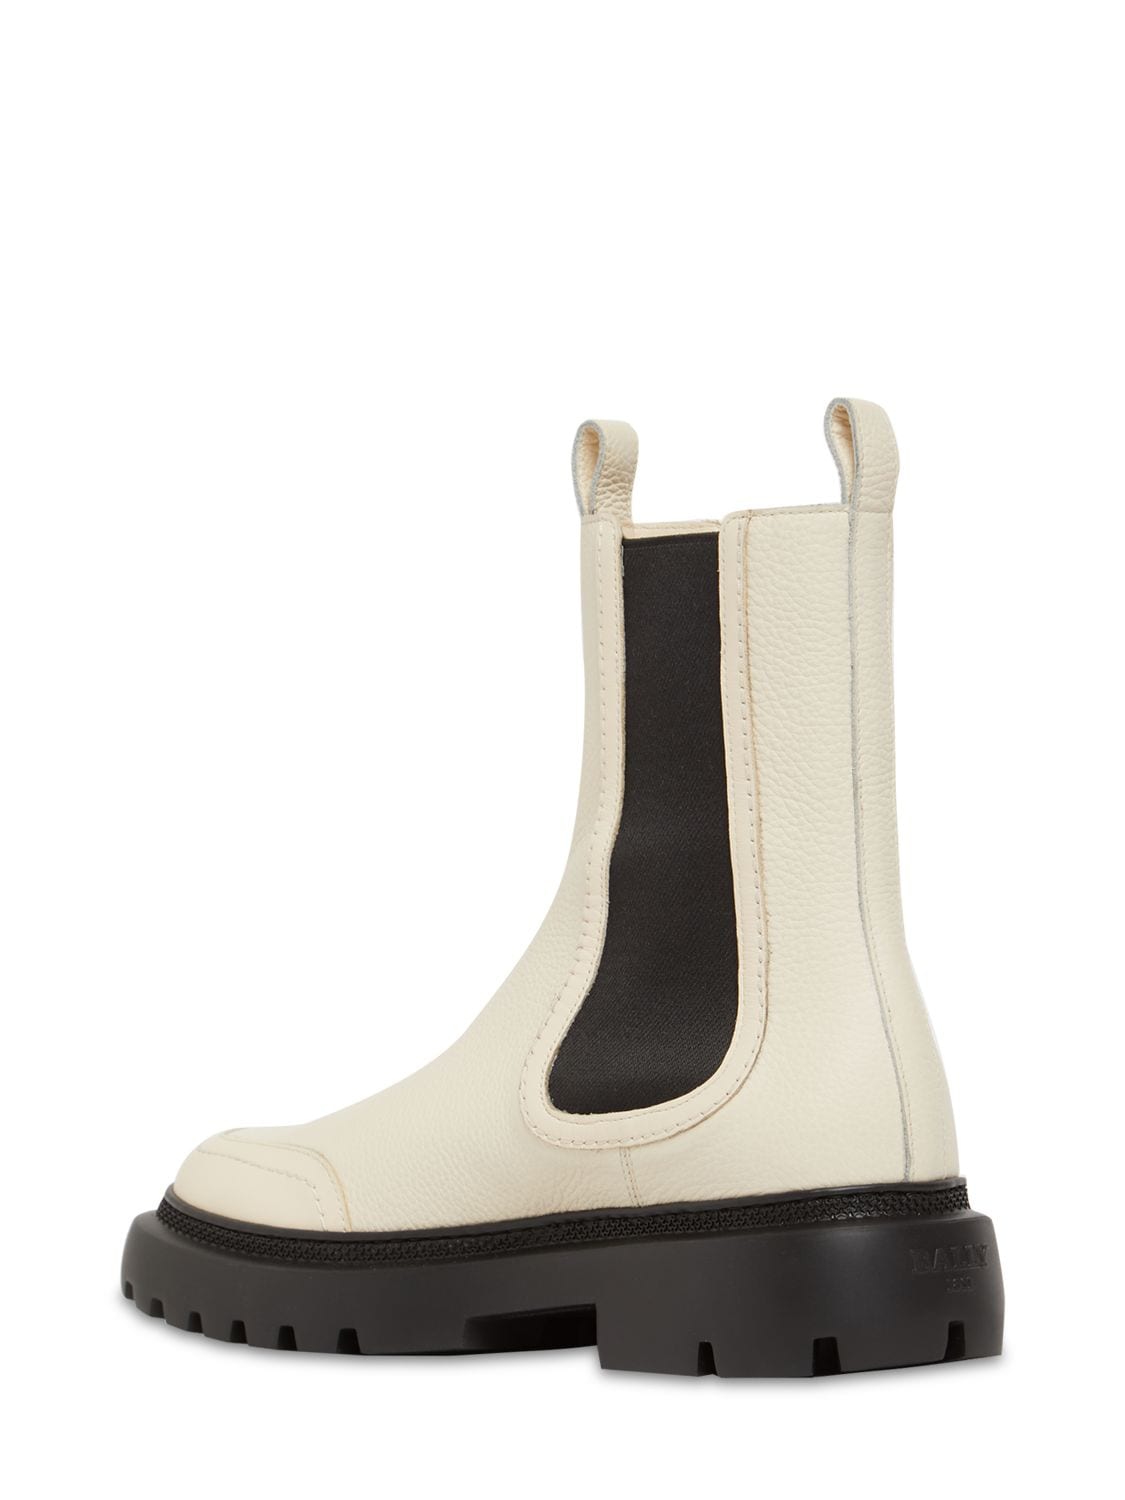 BALLY 30mm Ginny Leather Chelsea Boots | Smart Closet